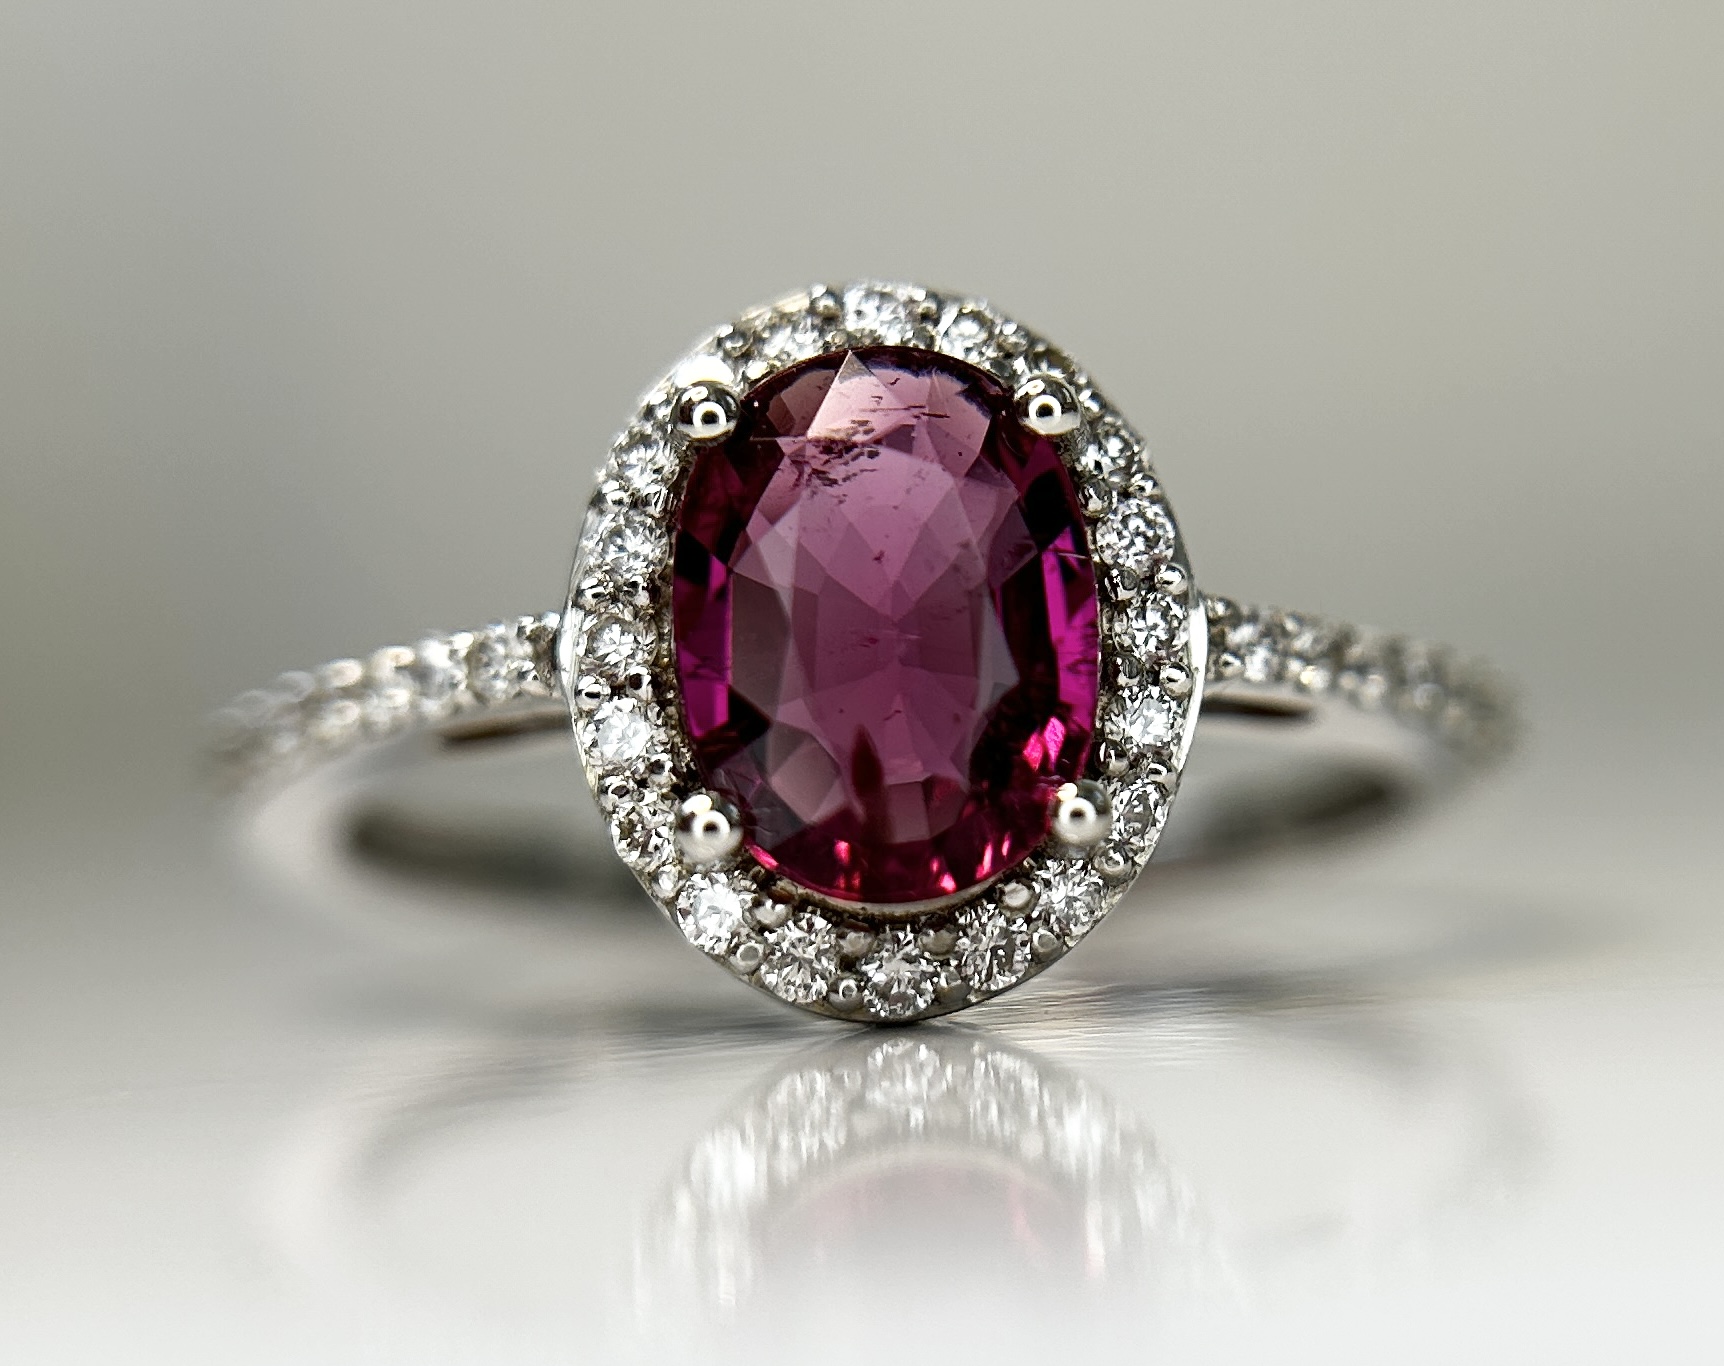 Beautiful Natural Tourmaline Rubellite Ring With Diamonds and 18k Gold - Image 7 of 8